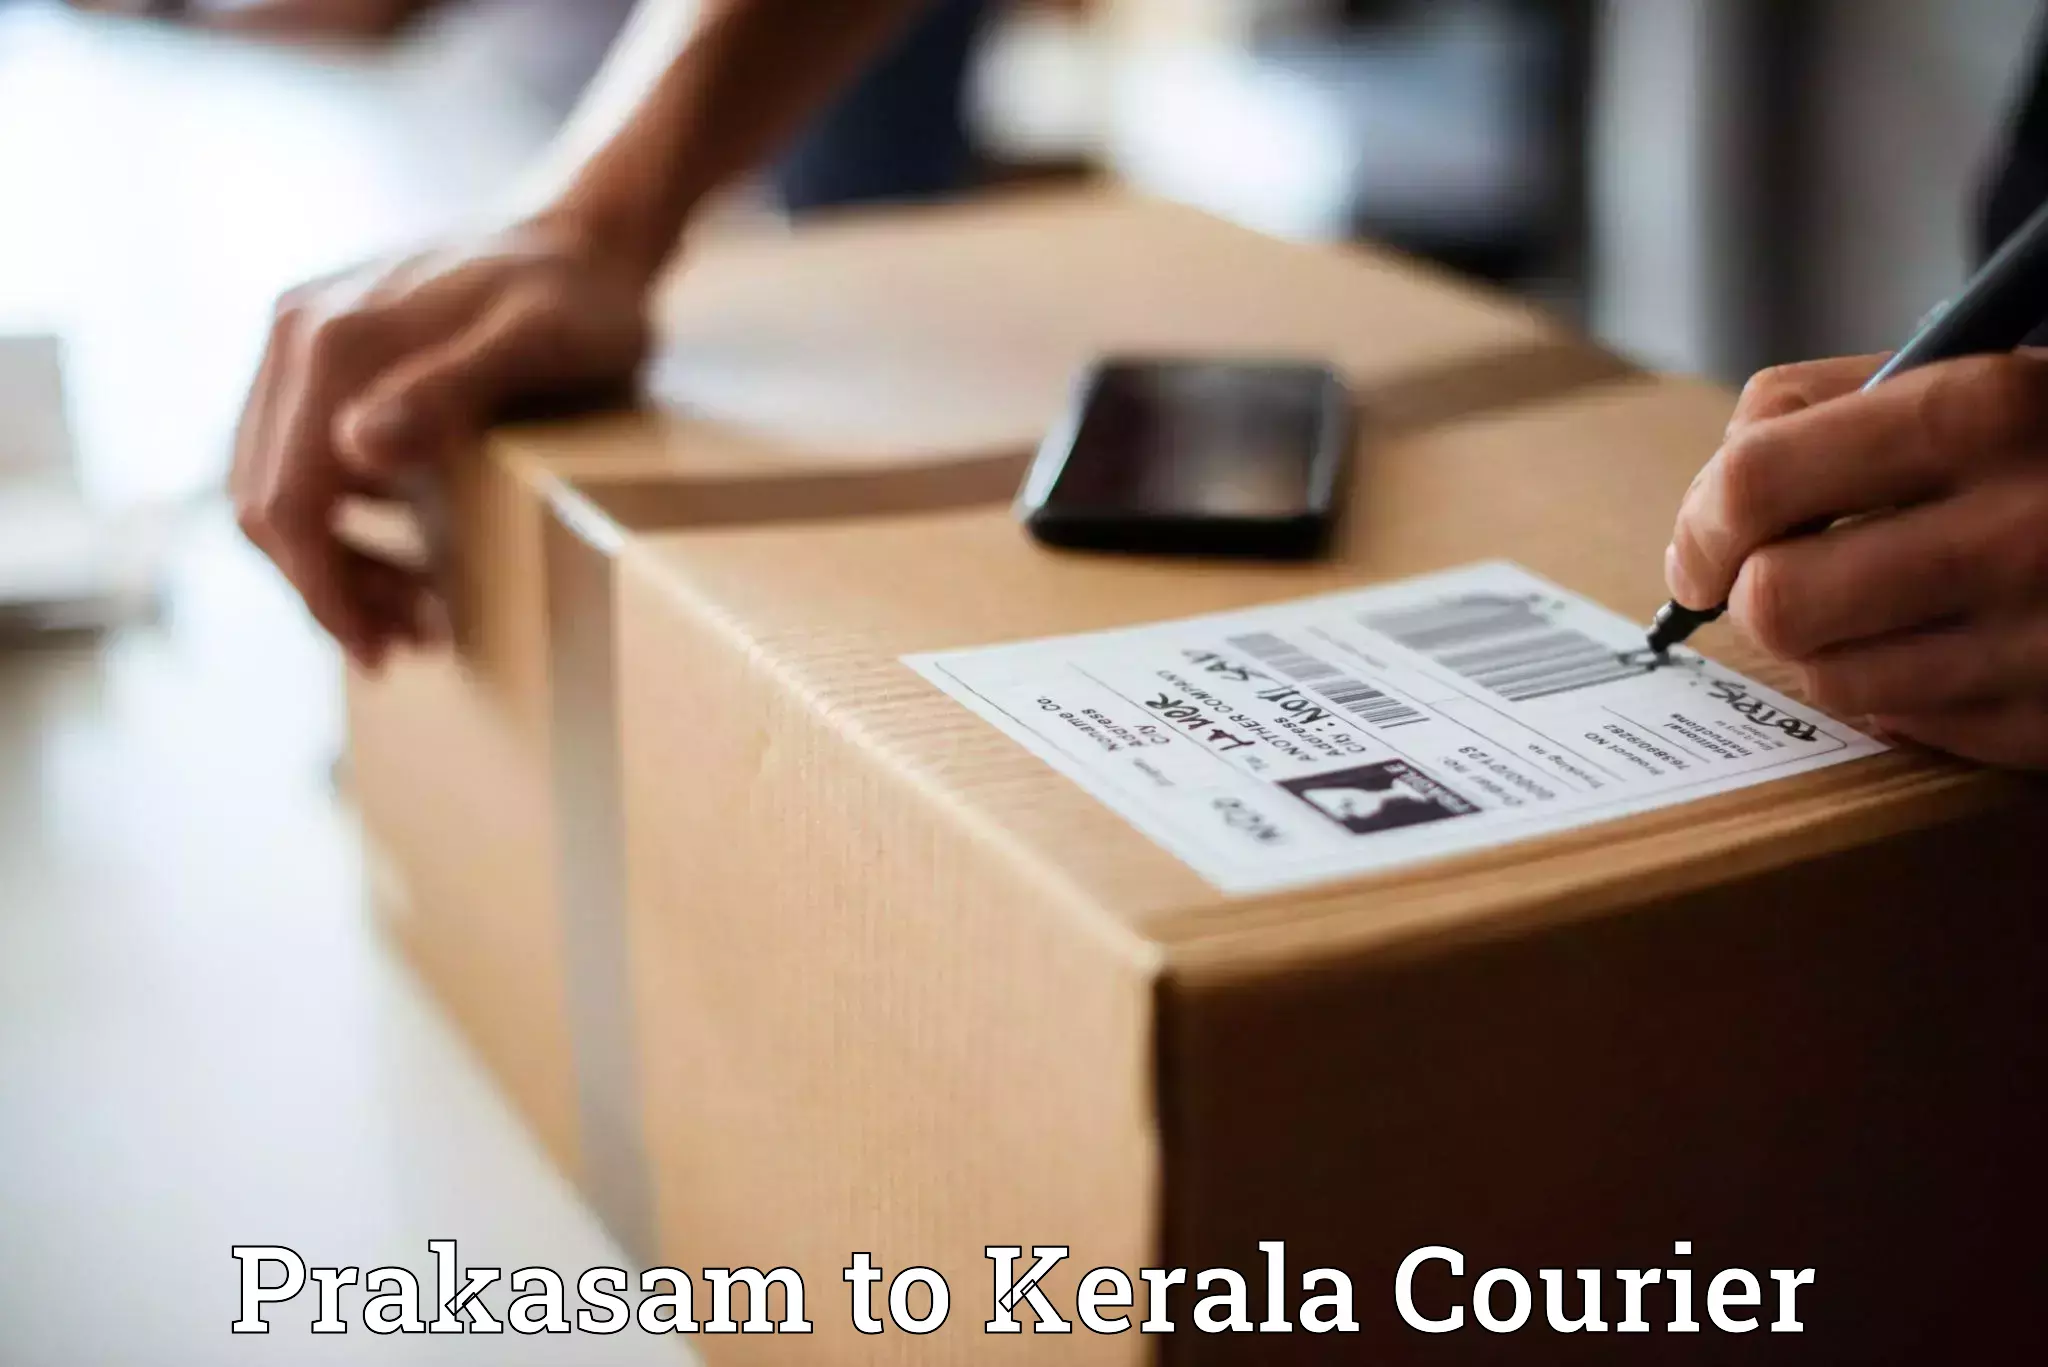 State-of-the-art courier technology Prakasam to Kerala